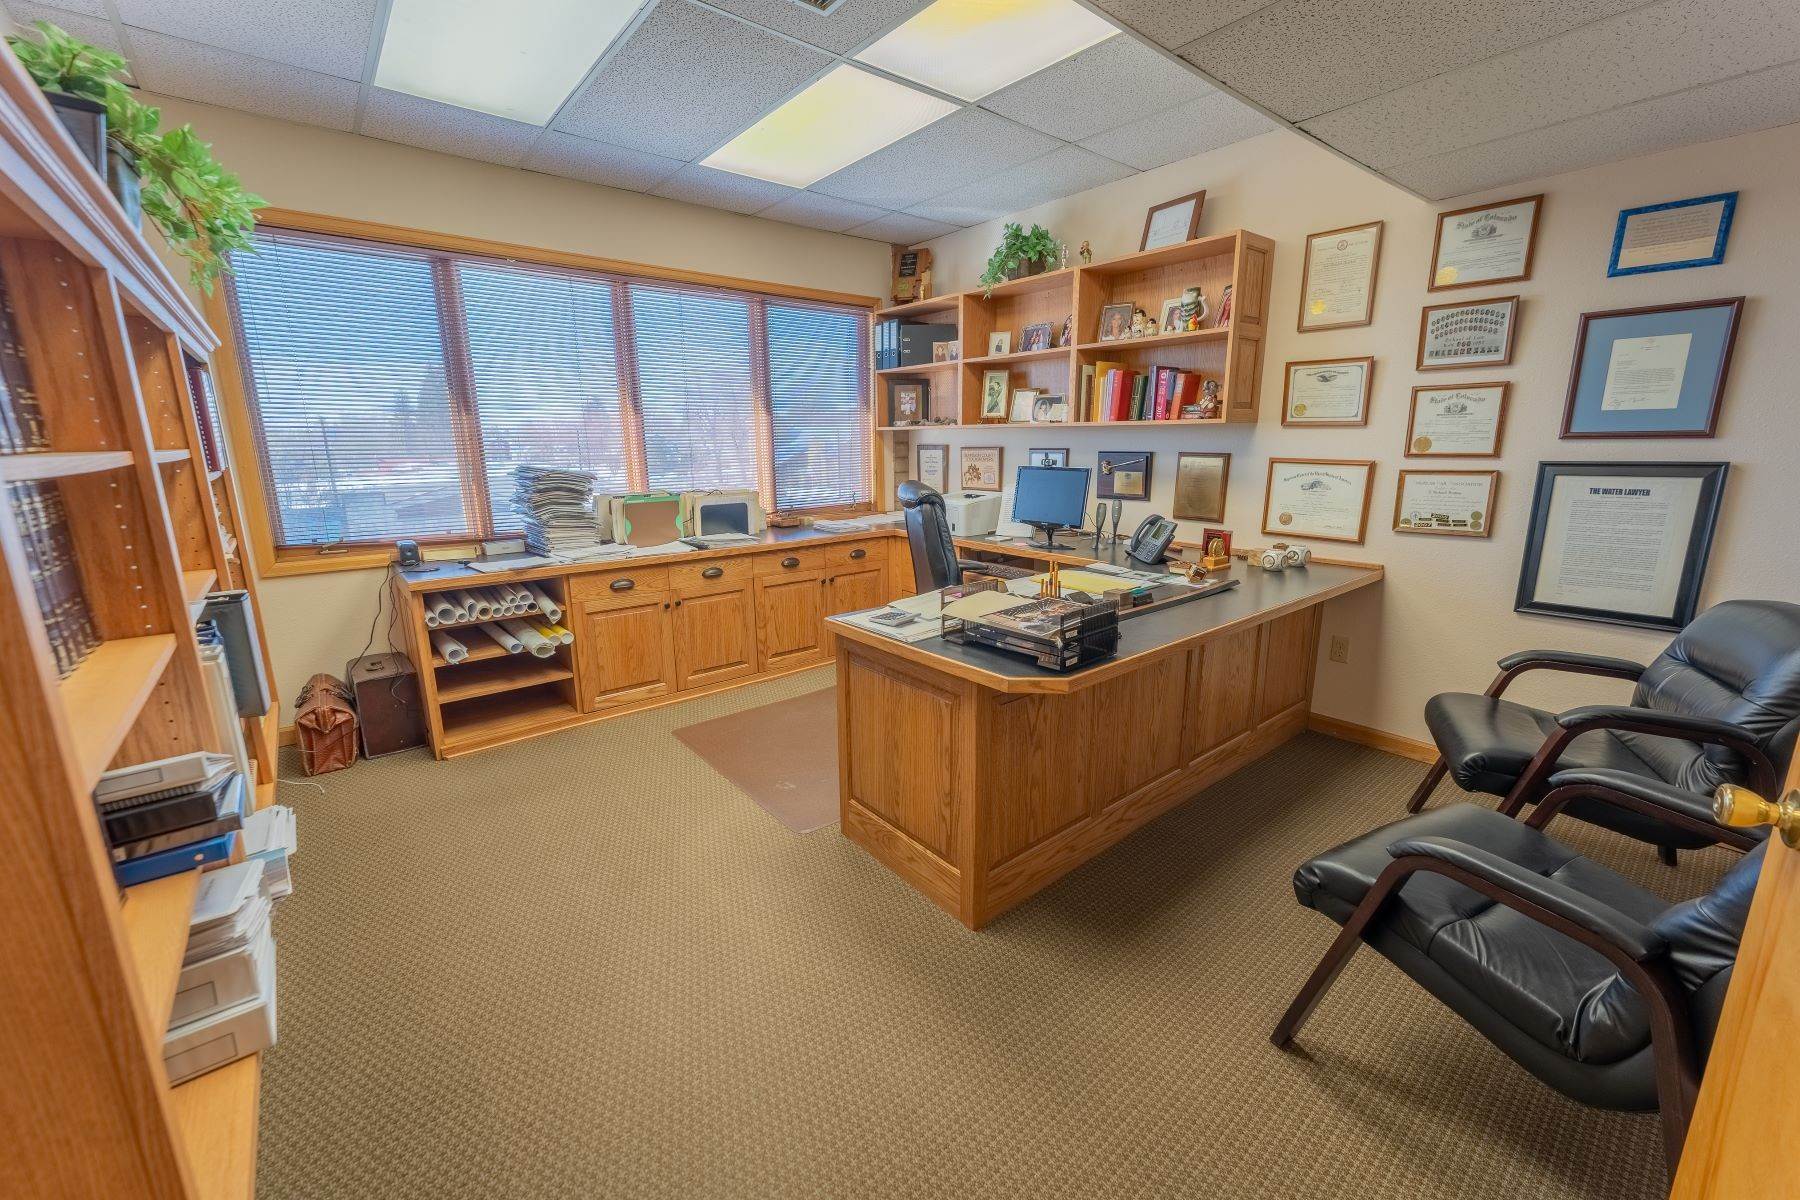 30. Property for Active at Situated in the Heart of Gunnison's Central Business District 234 North Main Street Gunnison, Colorado 81230 United States